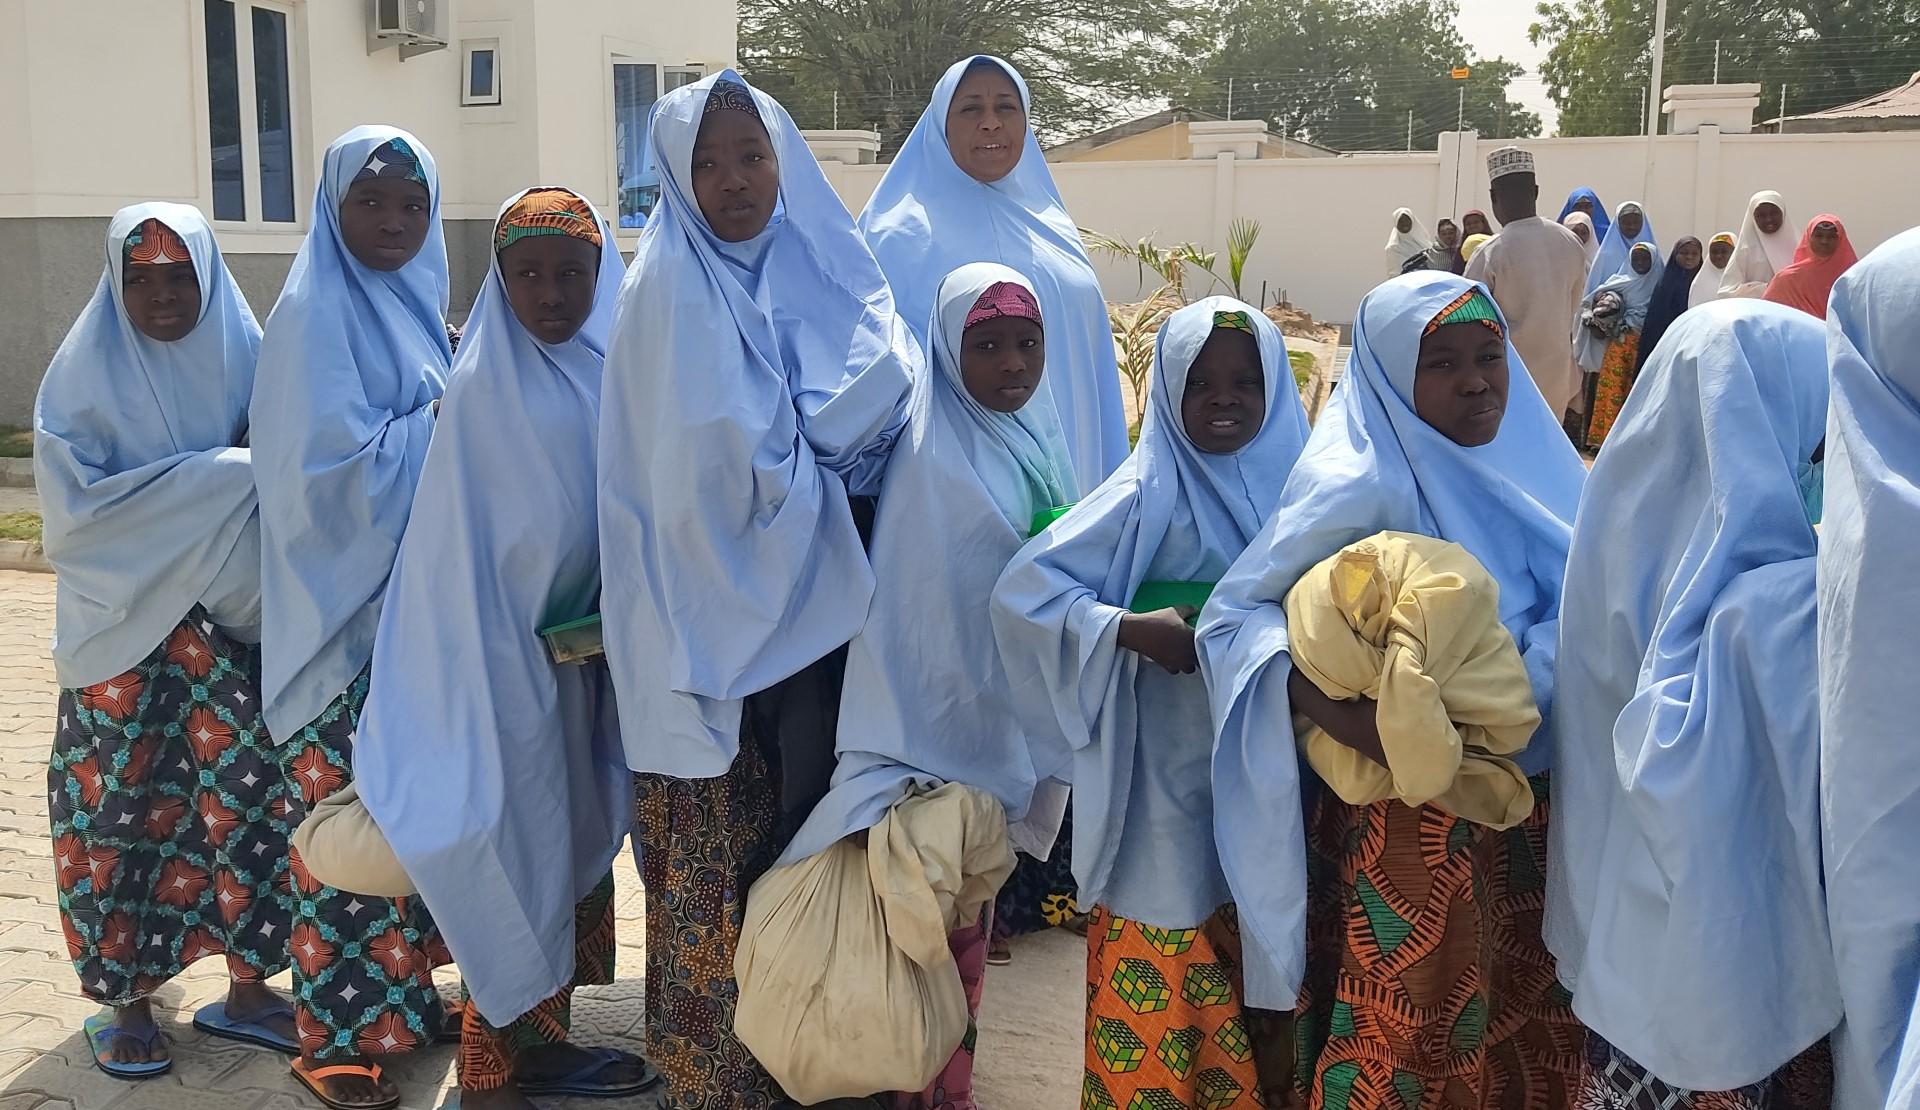 Kidnapped girls, react as they prepare to reunite with family members in Jangebe, Zamfara state, on March 3, 2021 after they were kidnapped from a boarding school in northwestern Nigeria, last week on Feb 26, 2021. Photo: AFP